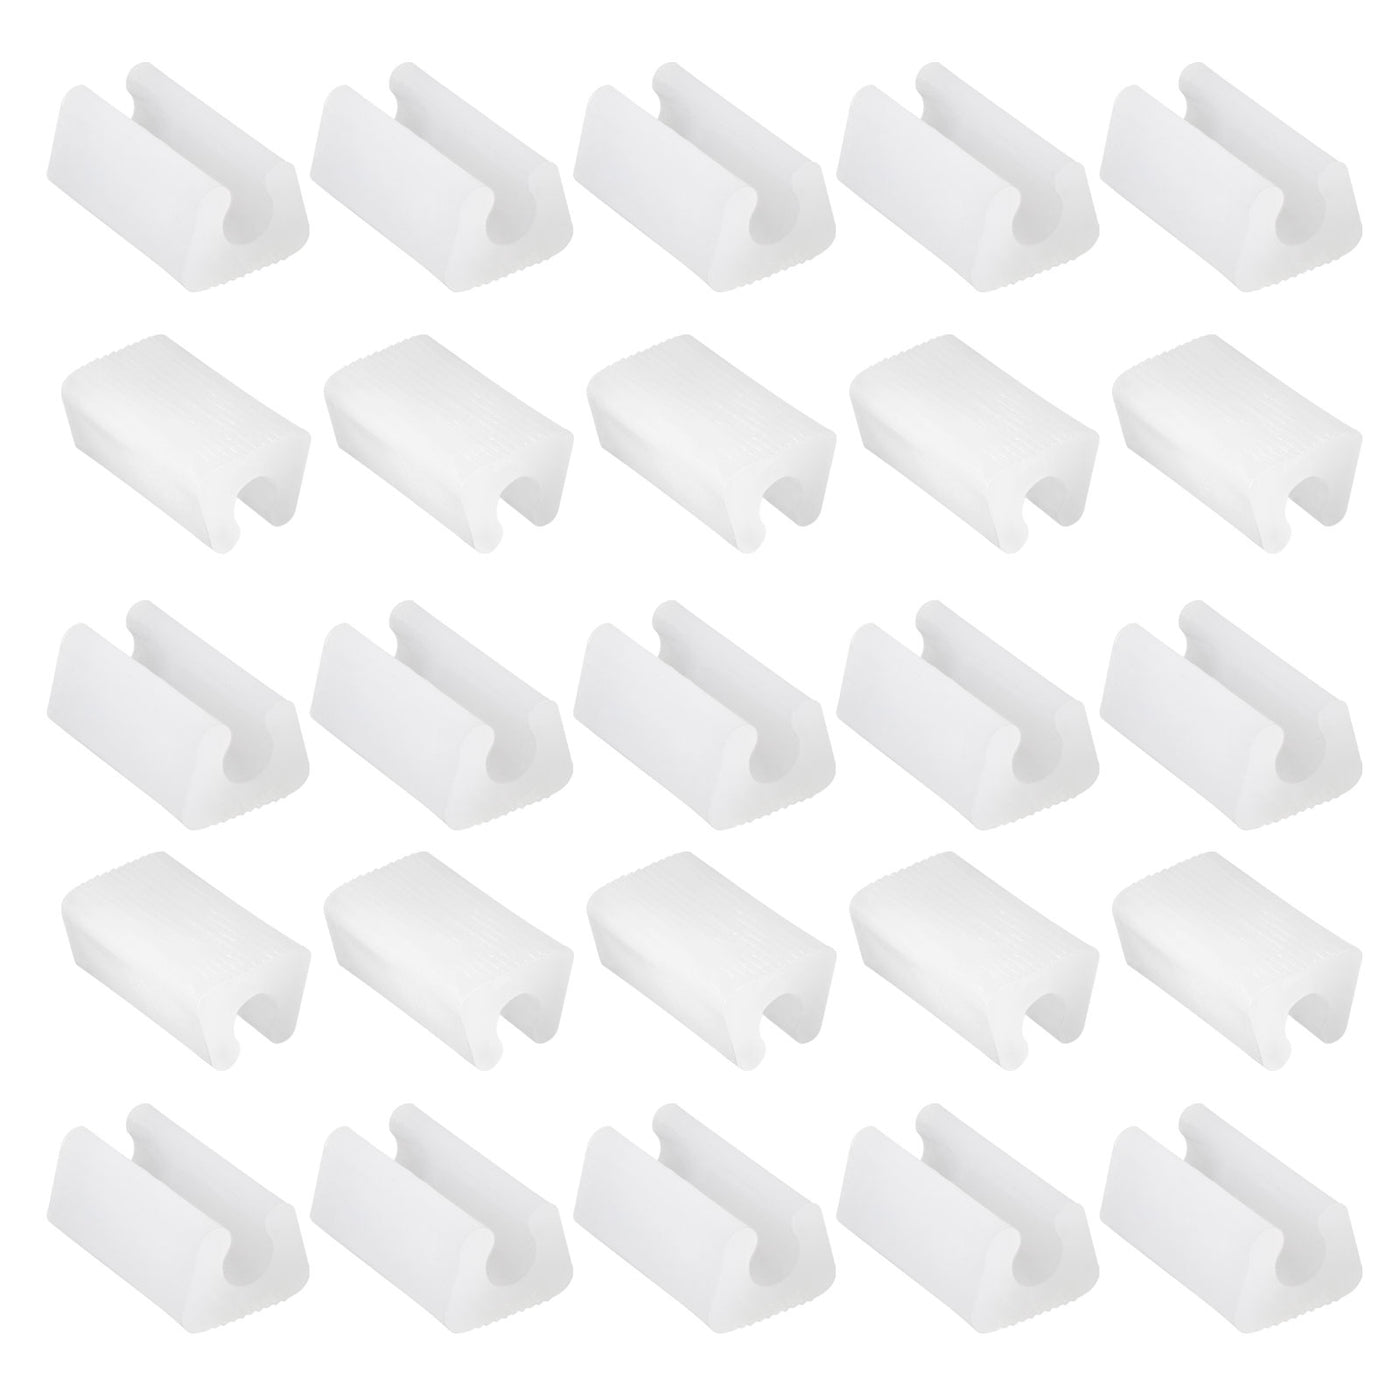 uxcell Uxcell 40Pcs Rectangle Shaped Non-Slip Chair Leg Tip 8mm Plastic Furniture Feet White